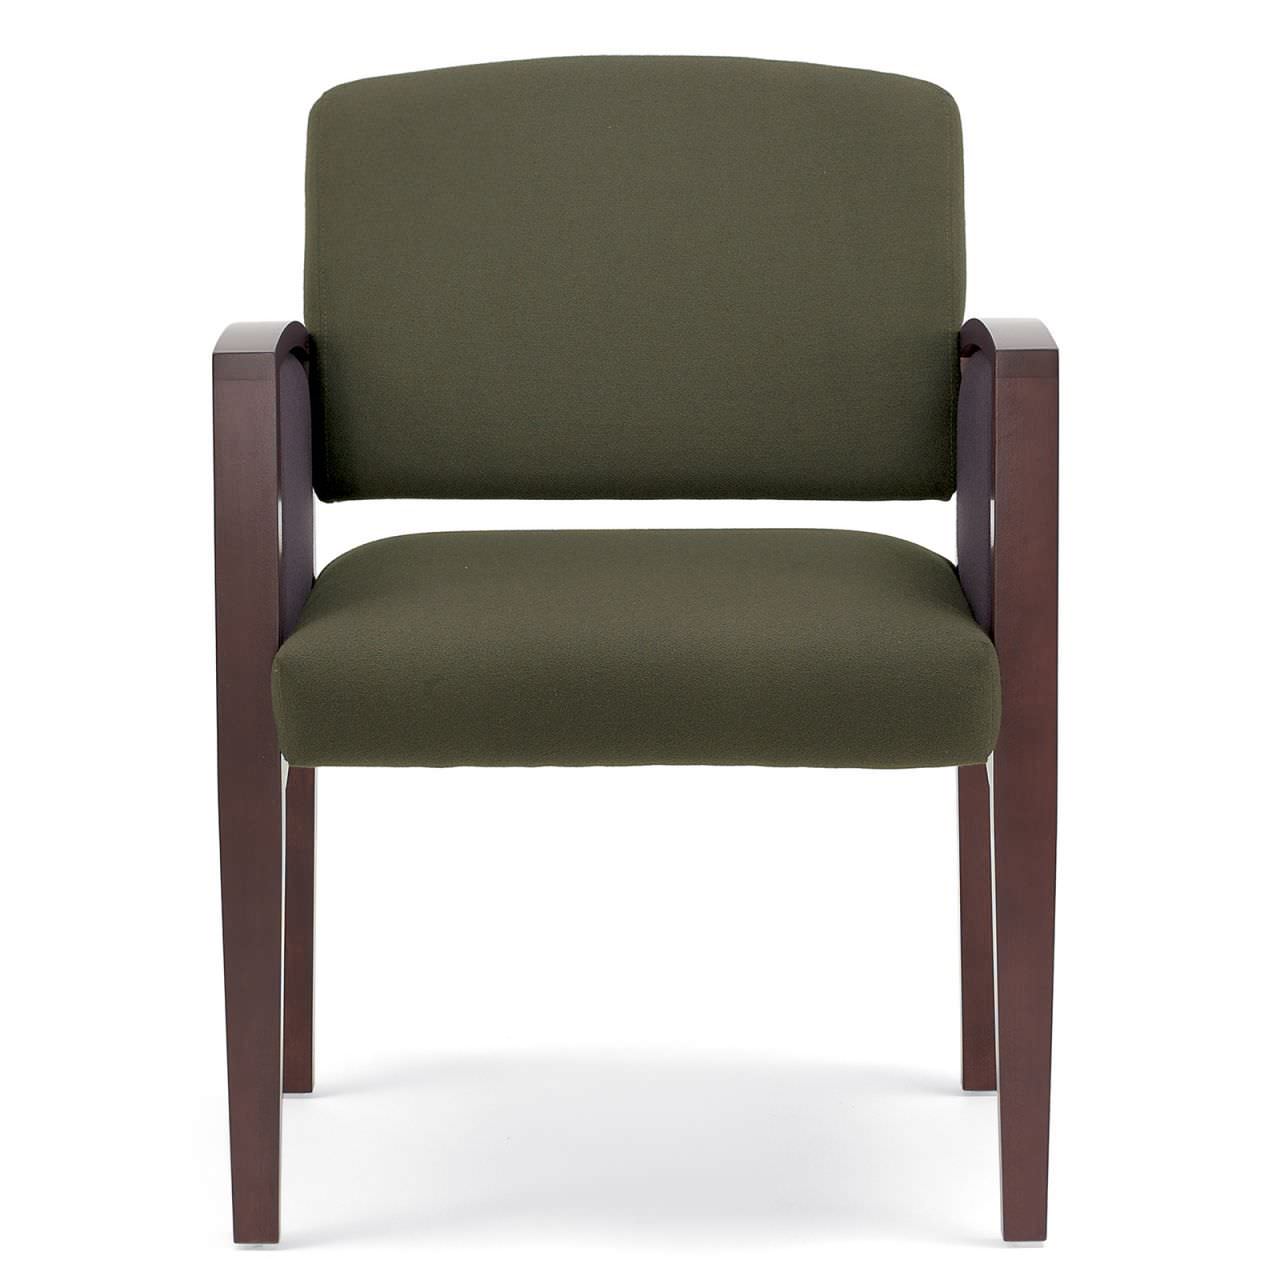 Waiting room chair / beam / with table / 4 seater Meridian Nemschoff